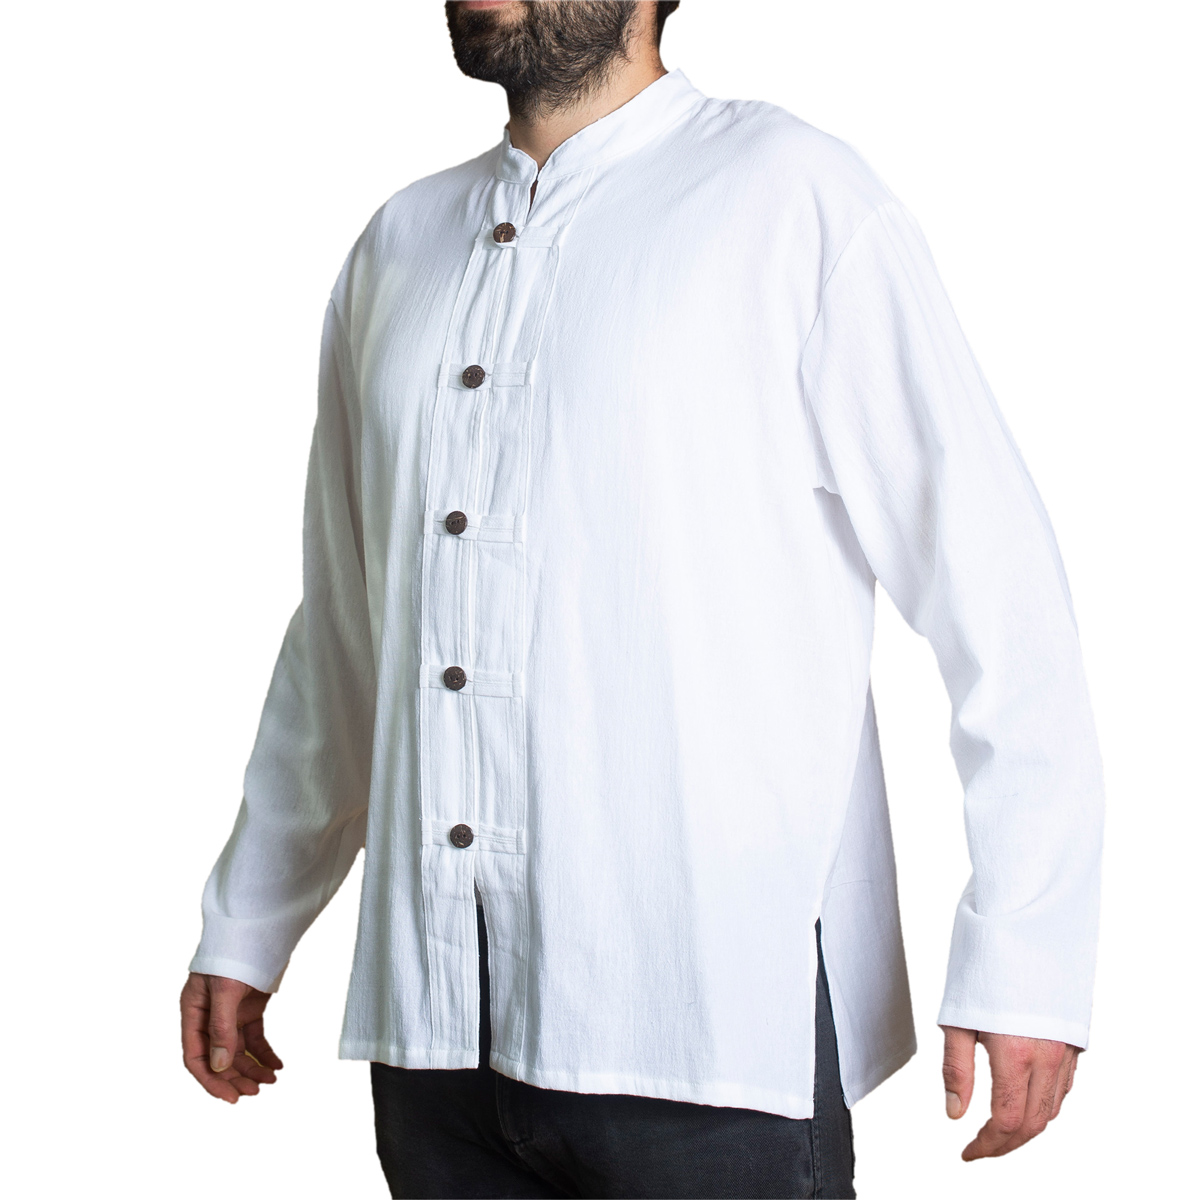 Thai Fisherman shirt with wooden buttons